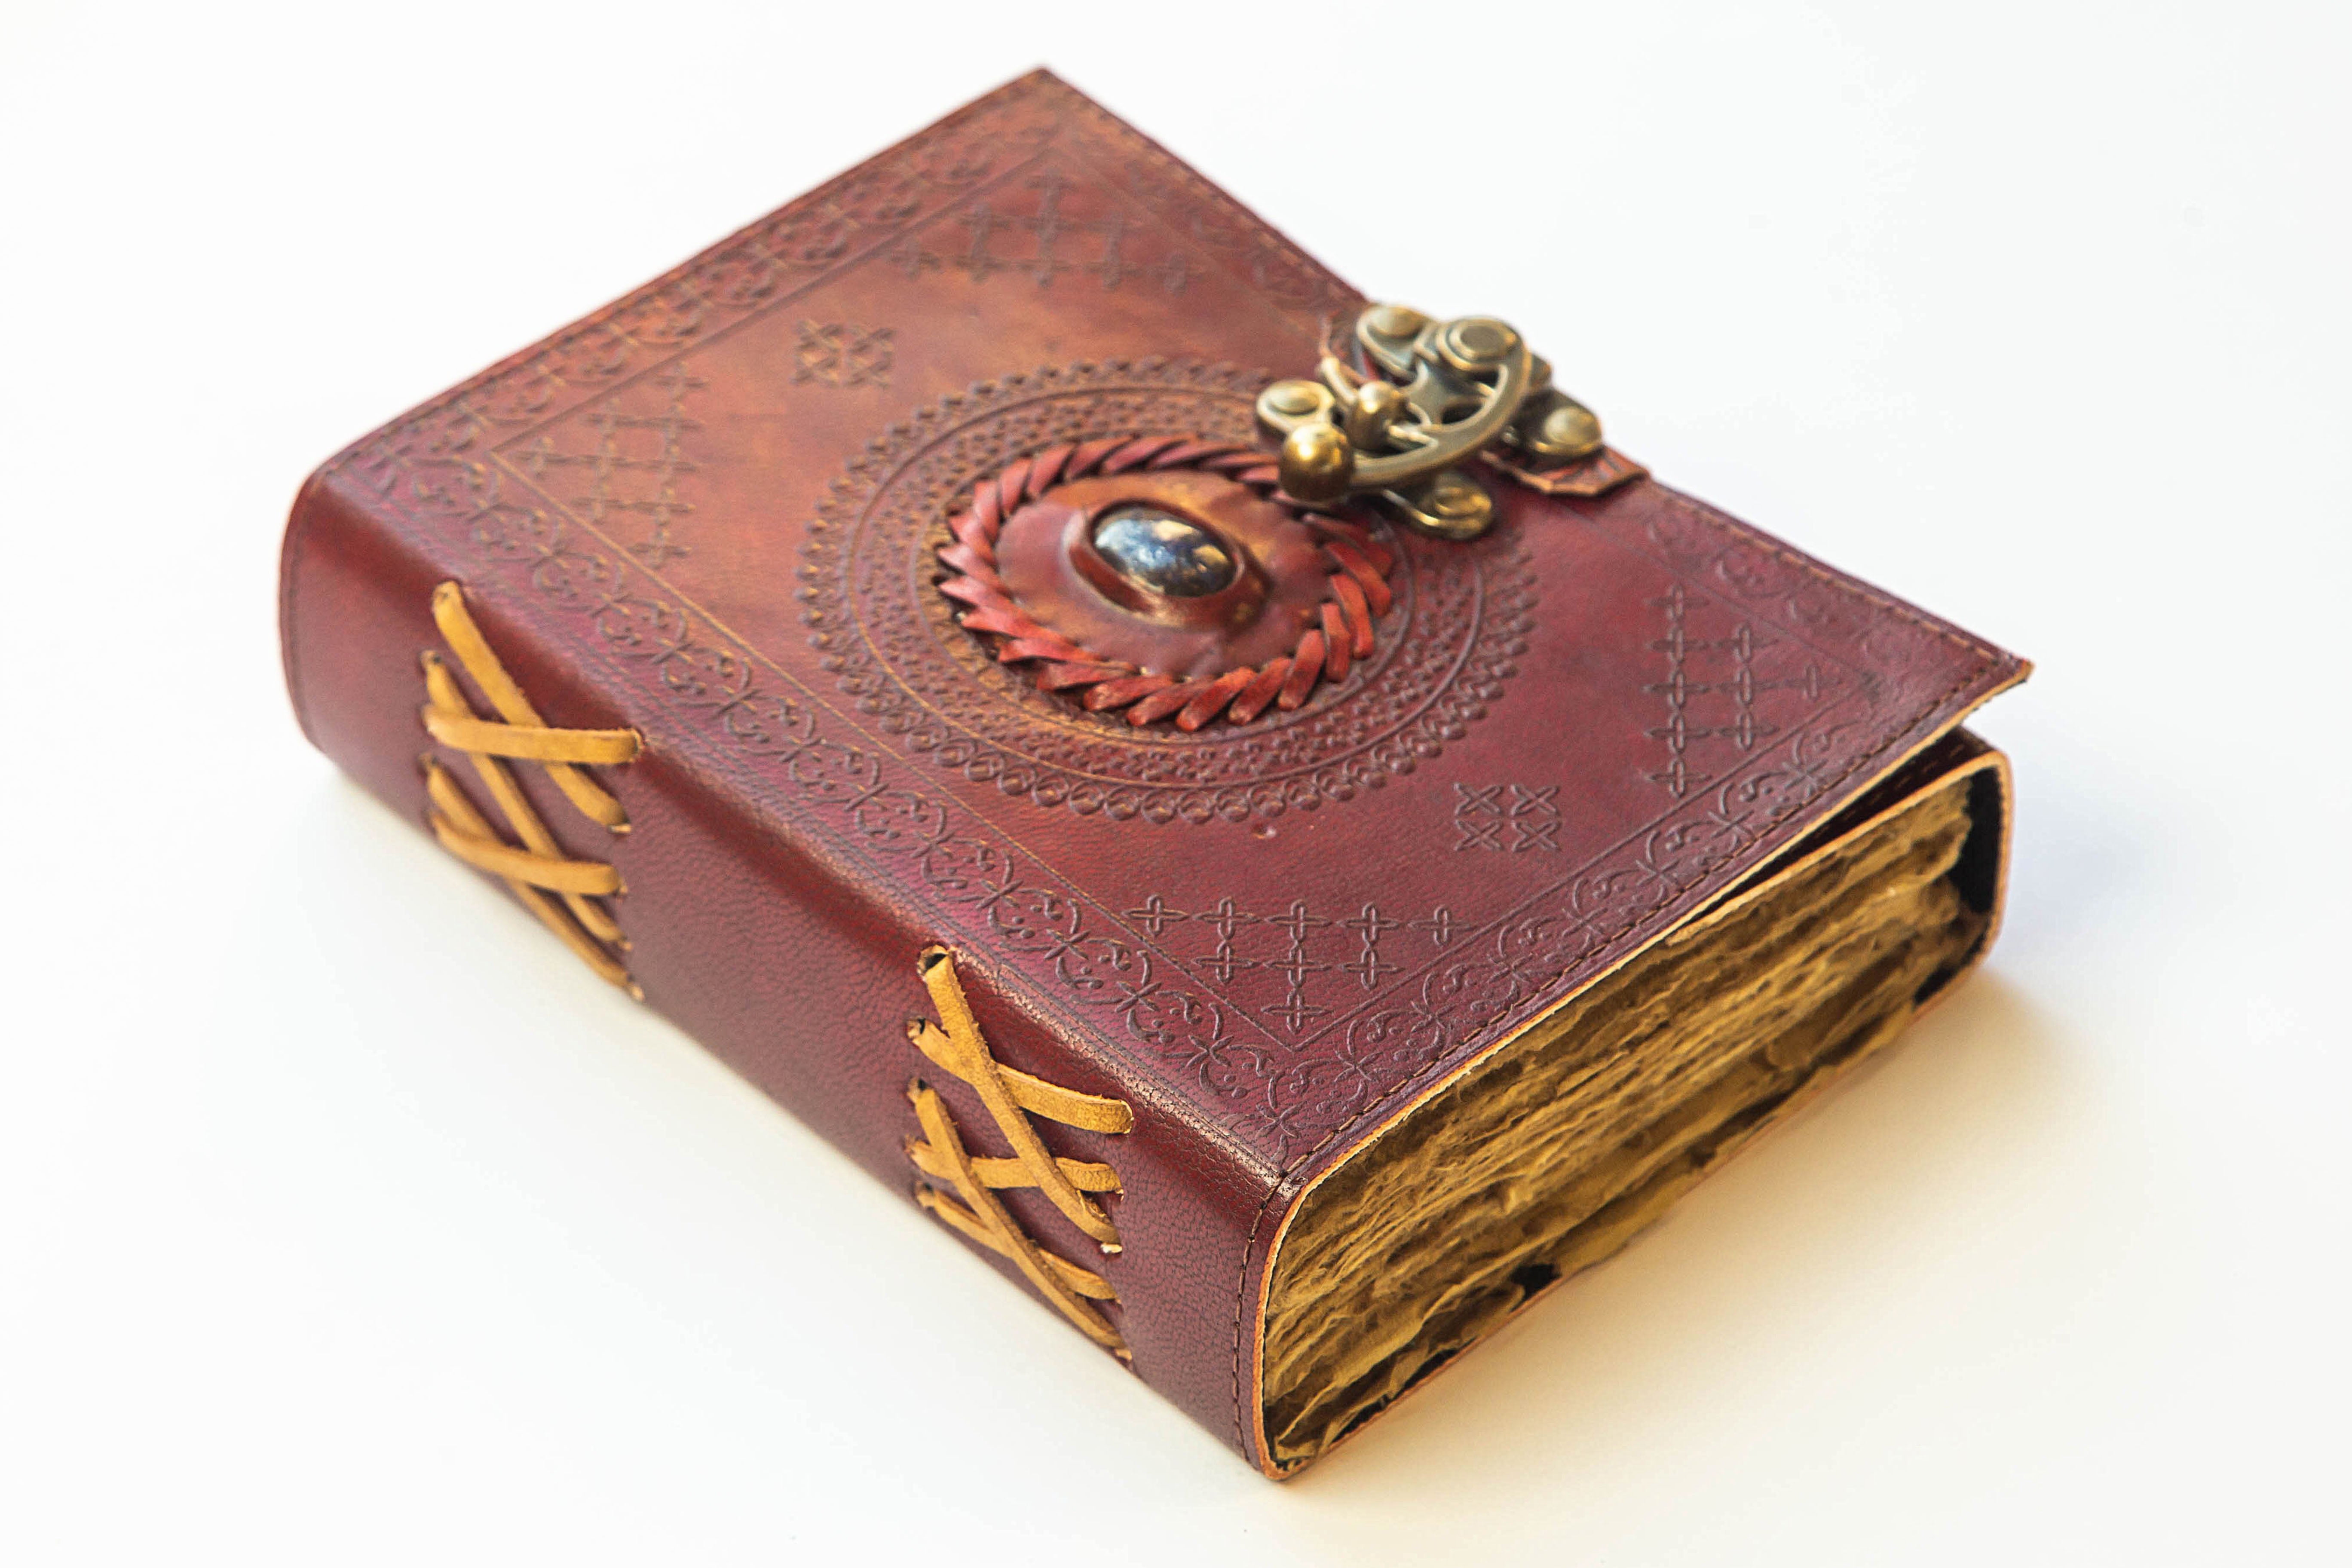 Embossed Gold Owl Store Indya Vintage Inspired Leather Journal Diary with Handmade Unlined Pages 8 x 6 192 Pages 